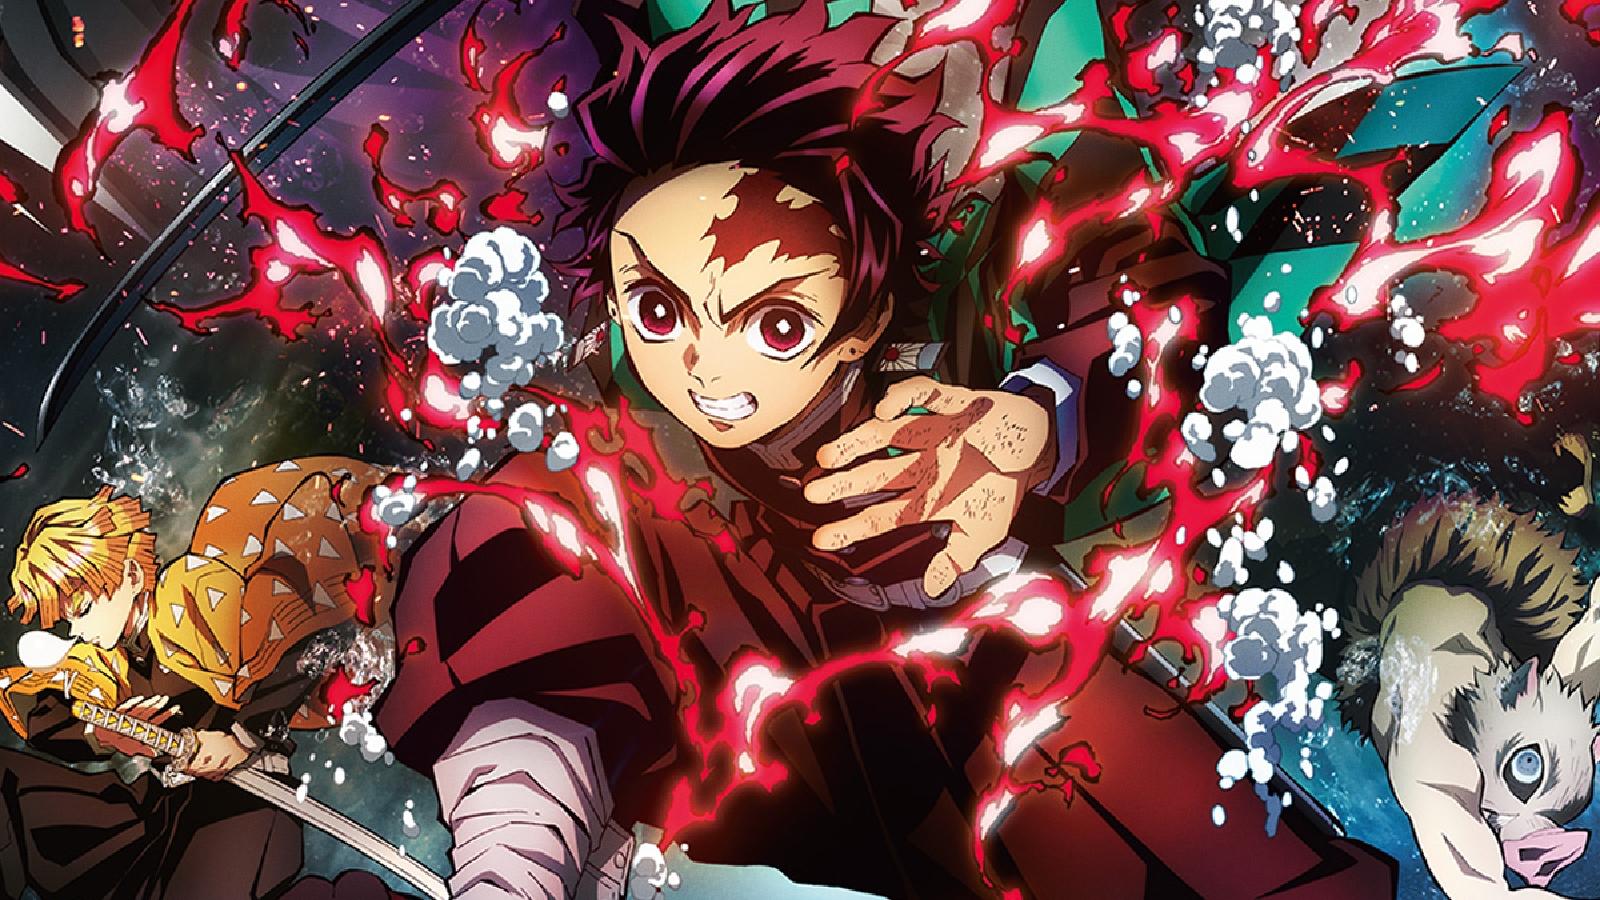 Tanjiro in the promotional poster for Demon Slayer